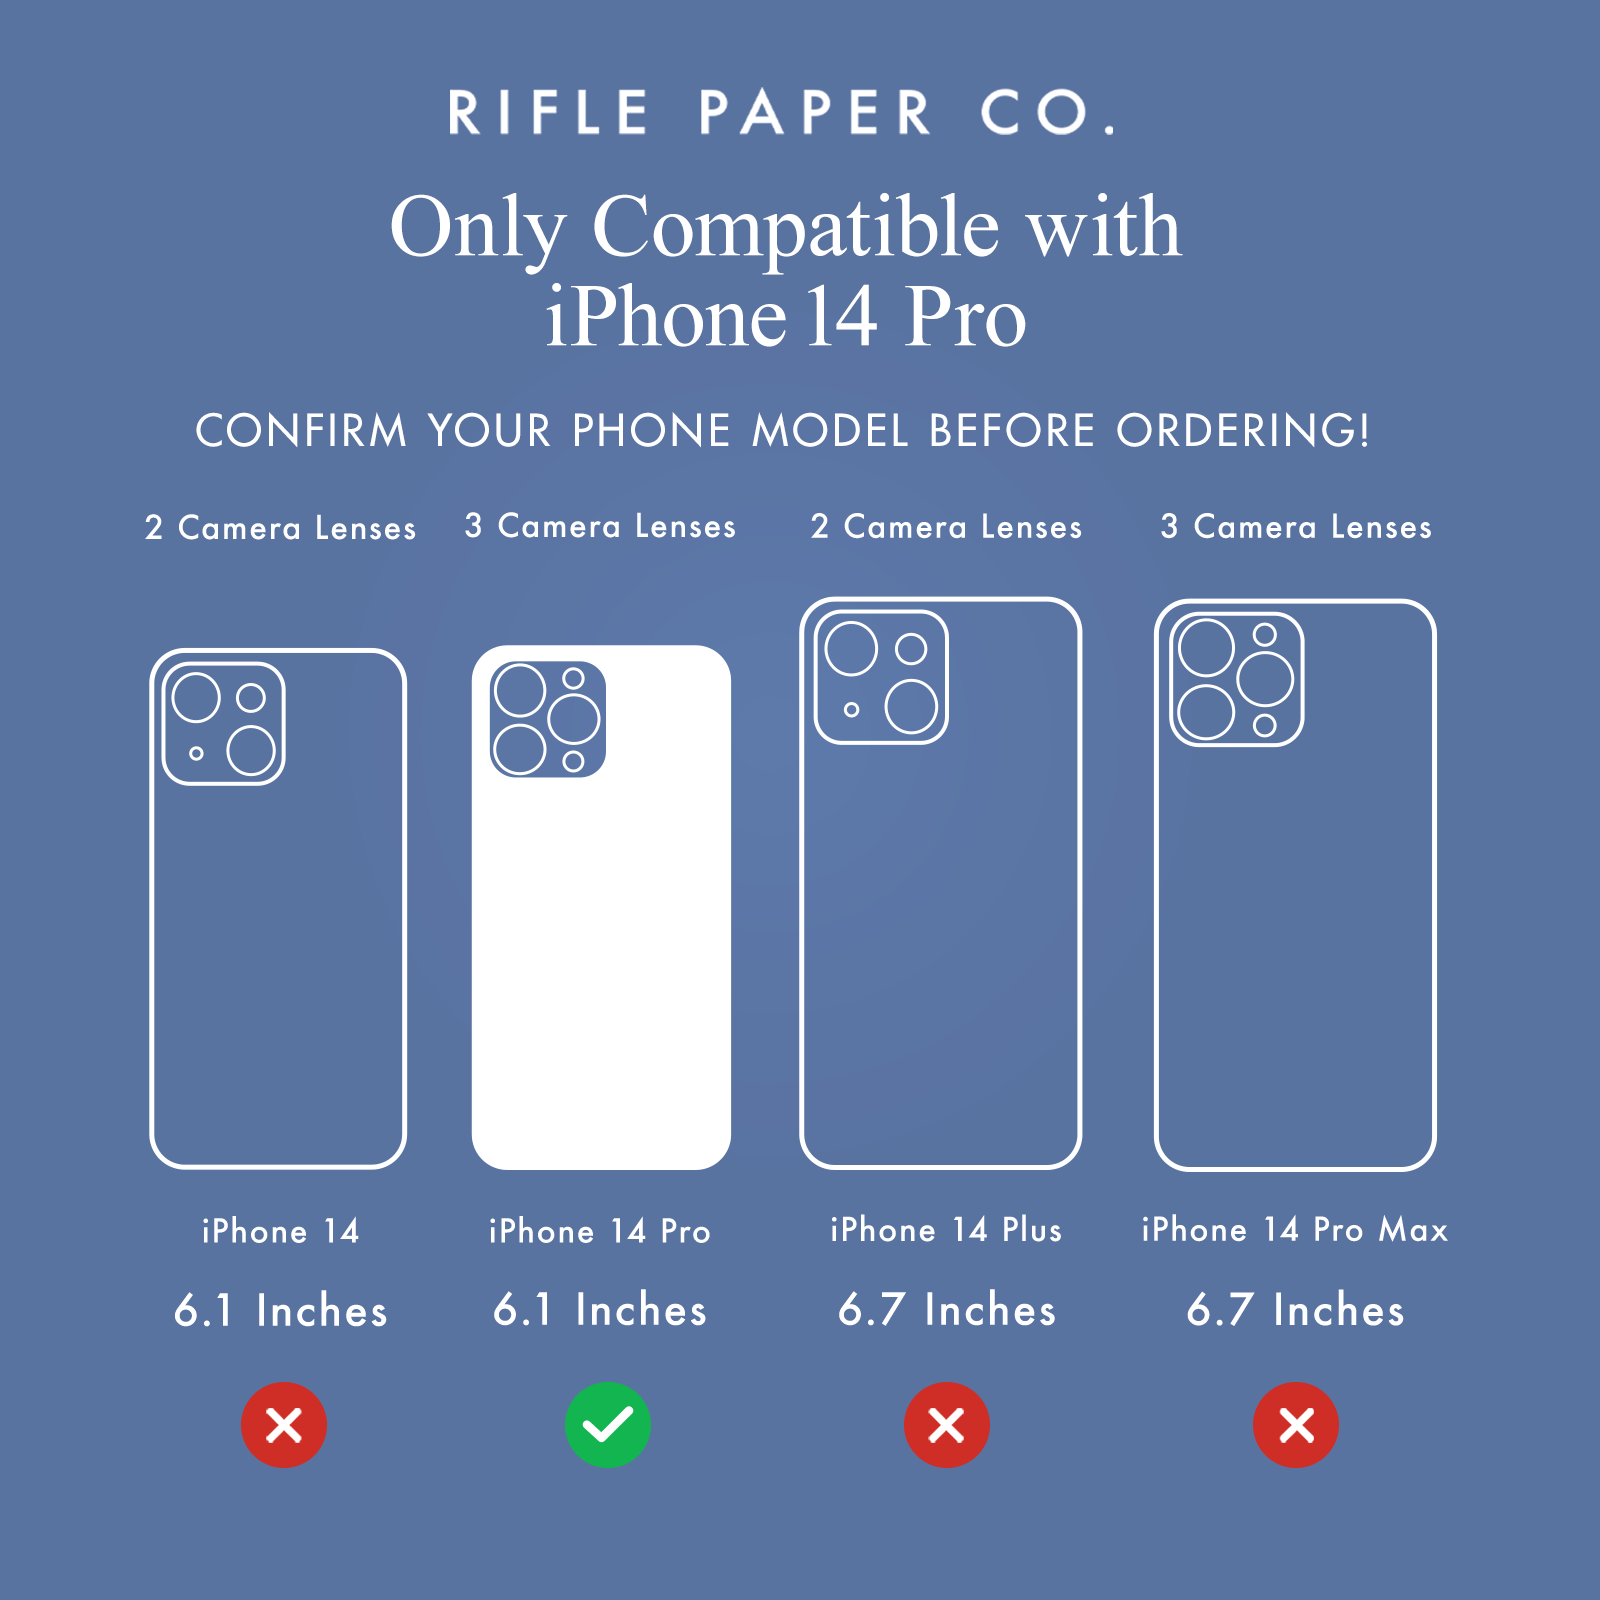 ONLY COMPATIBLE WITH IPHONE 14 PRO. CONFIRM YOUR PHONE MODEL BEFORE ORDERING!